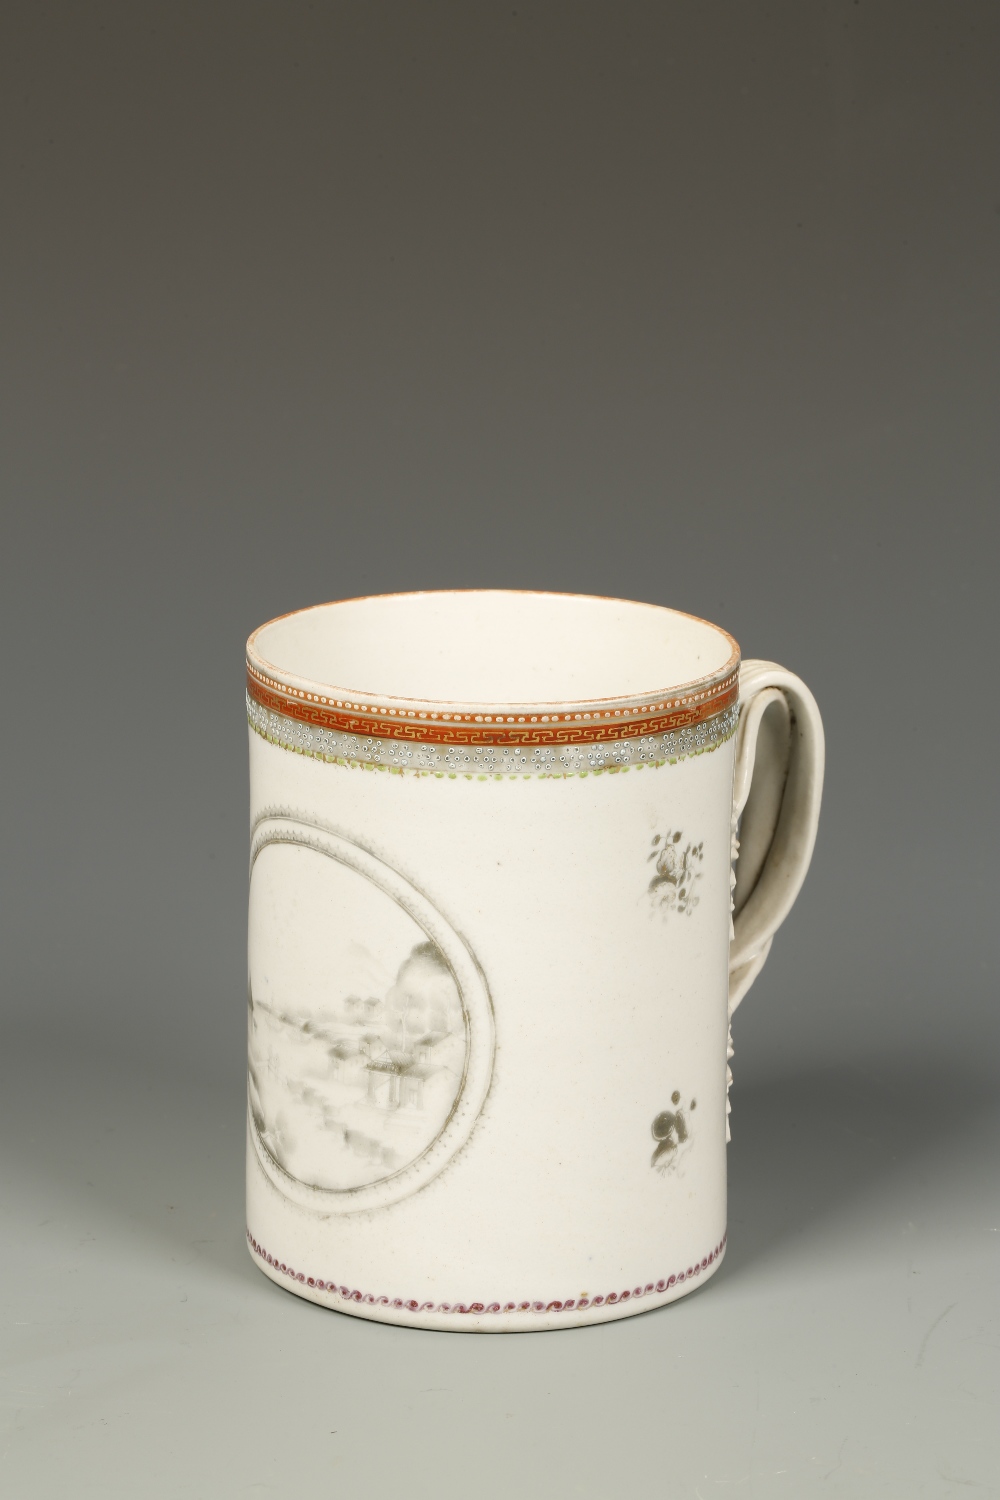 A CHINESE EXPORT MUG, one side decorated with a landscape roundel, Qing, late 18th/early 19th